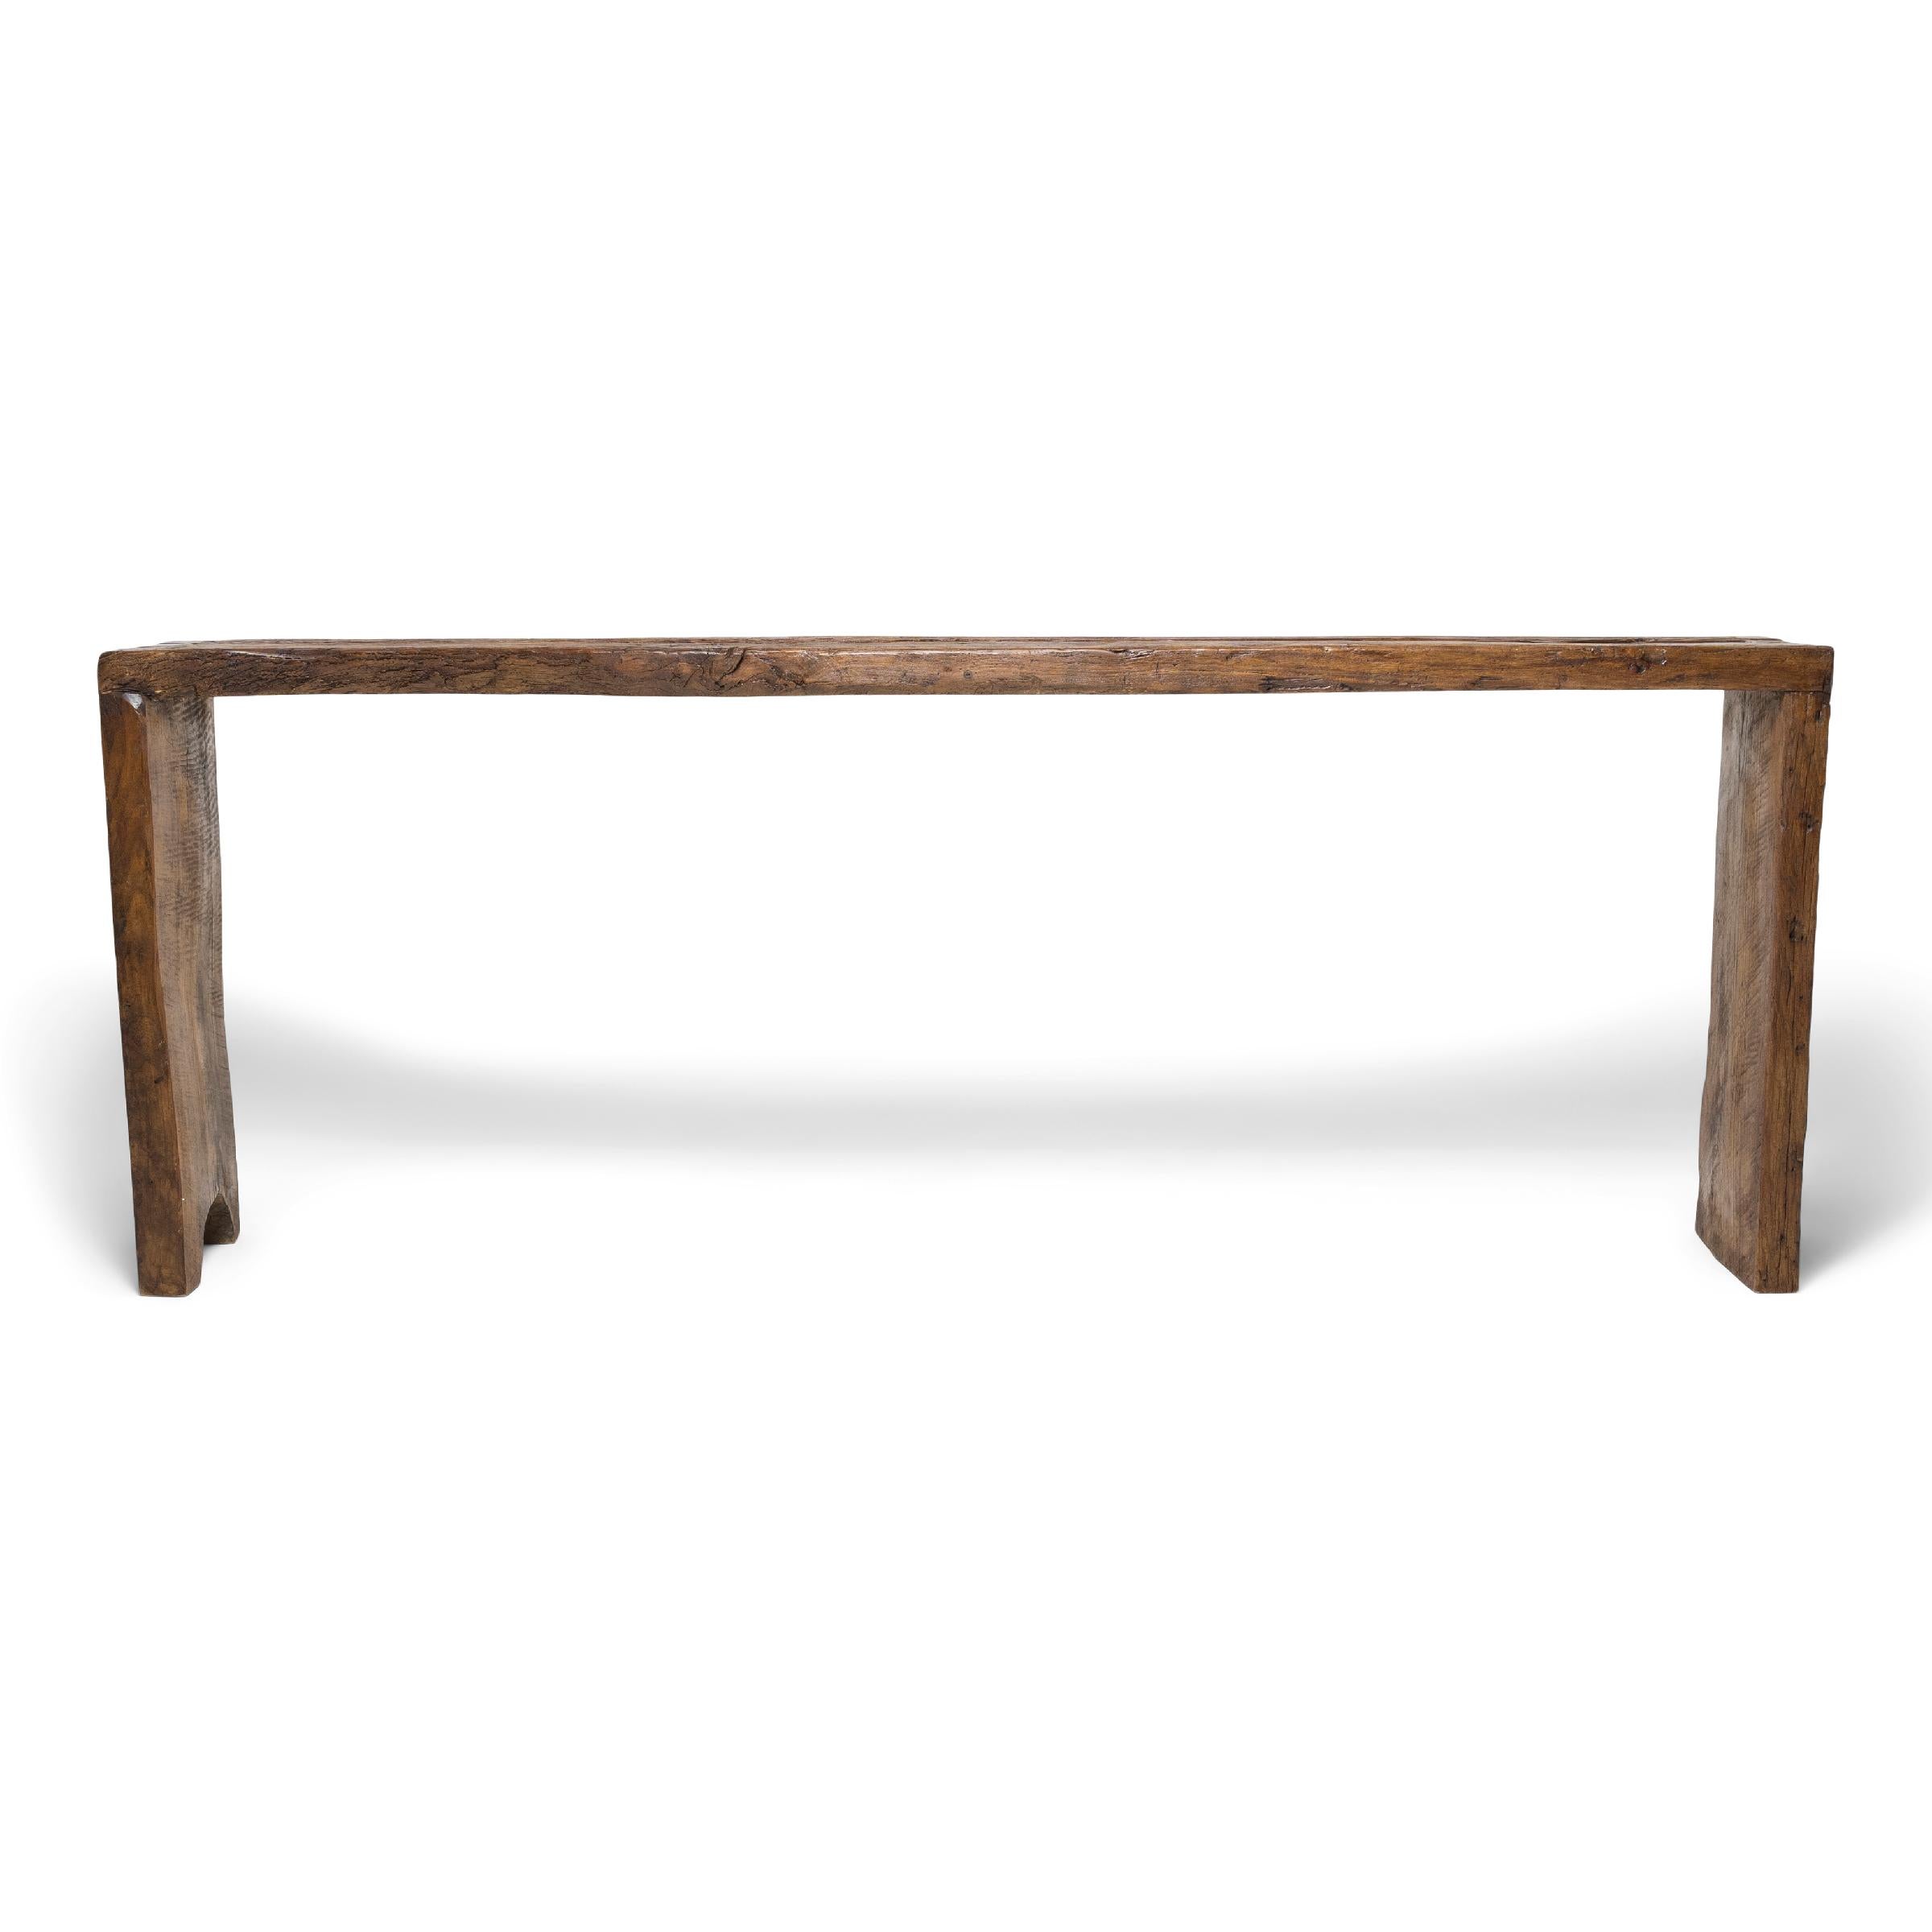 This contemporary console table is a celebration of wabi-sabi style. Crafted of wood reclaimed from Qing-dynasty architecture, the table has a minimalist waterfall design with dovetailed corners that recreate traditional joinery methods and add